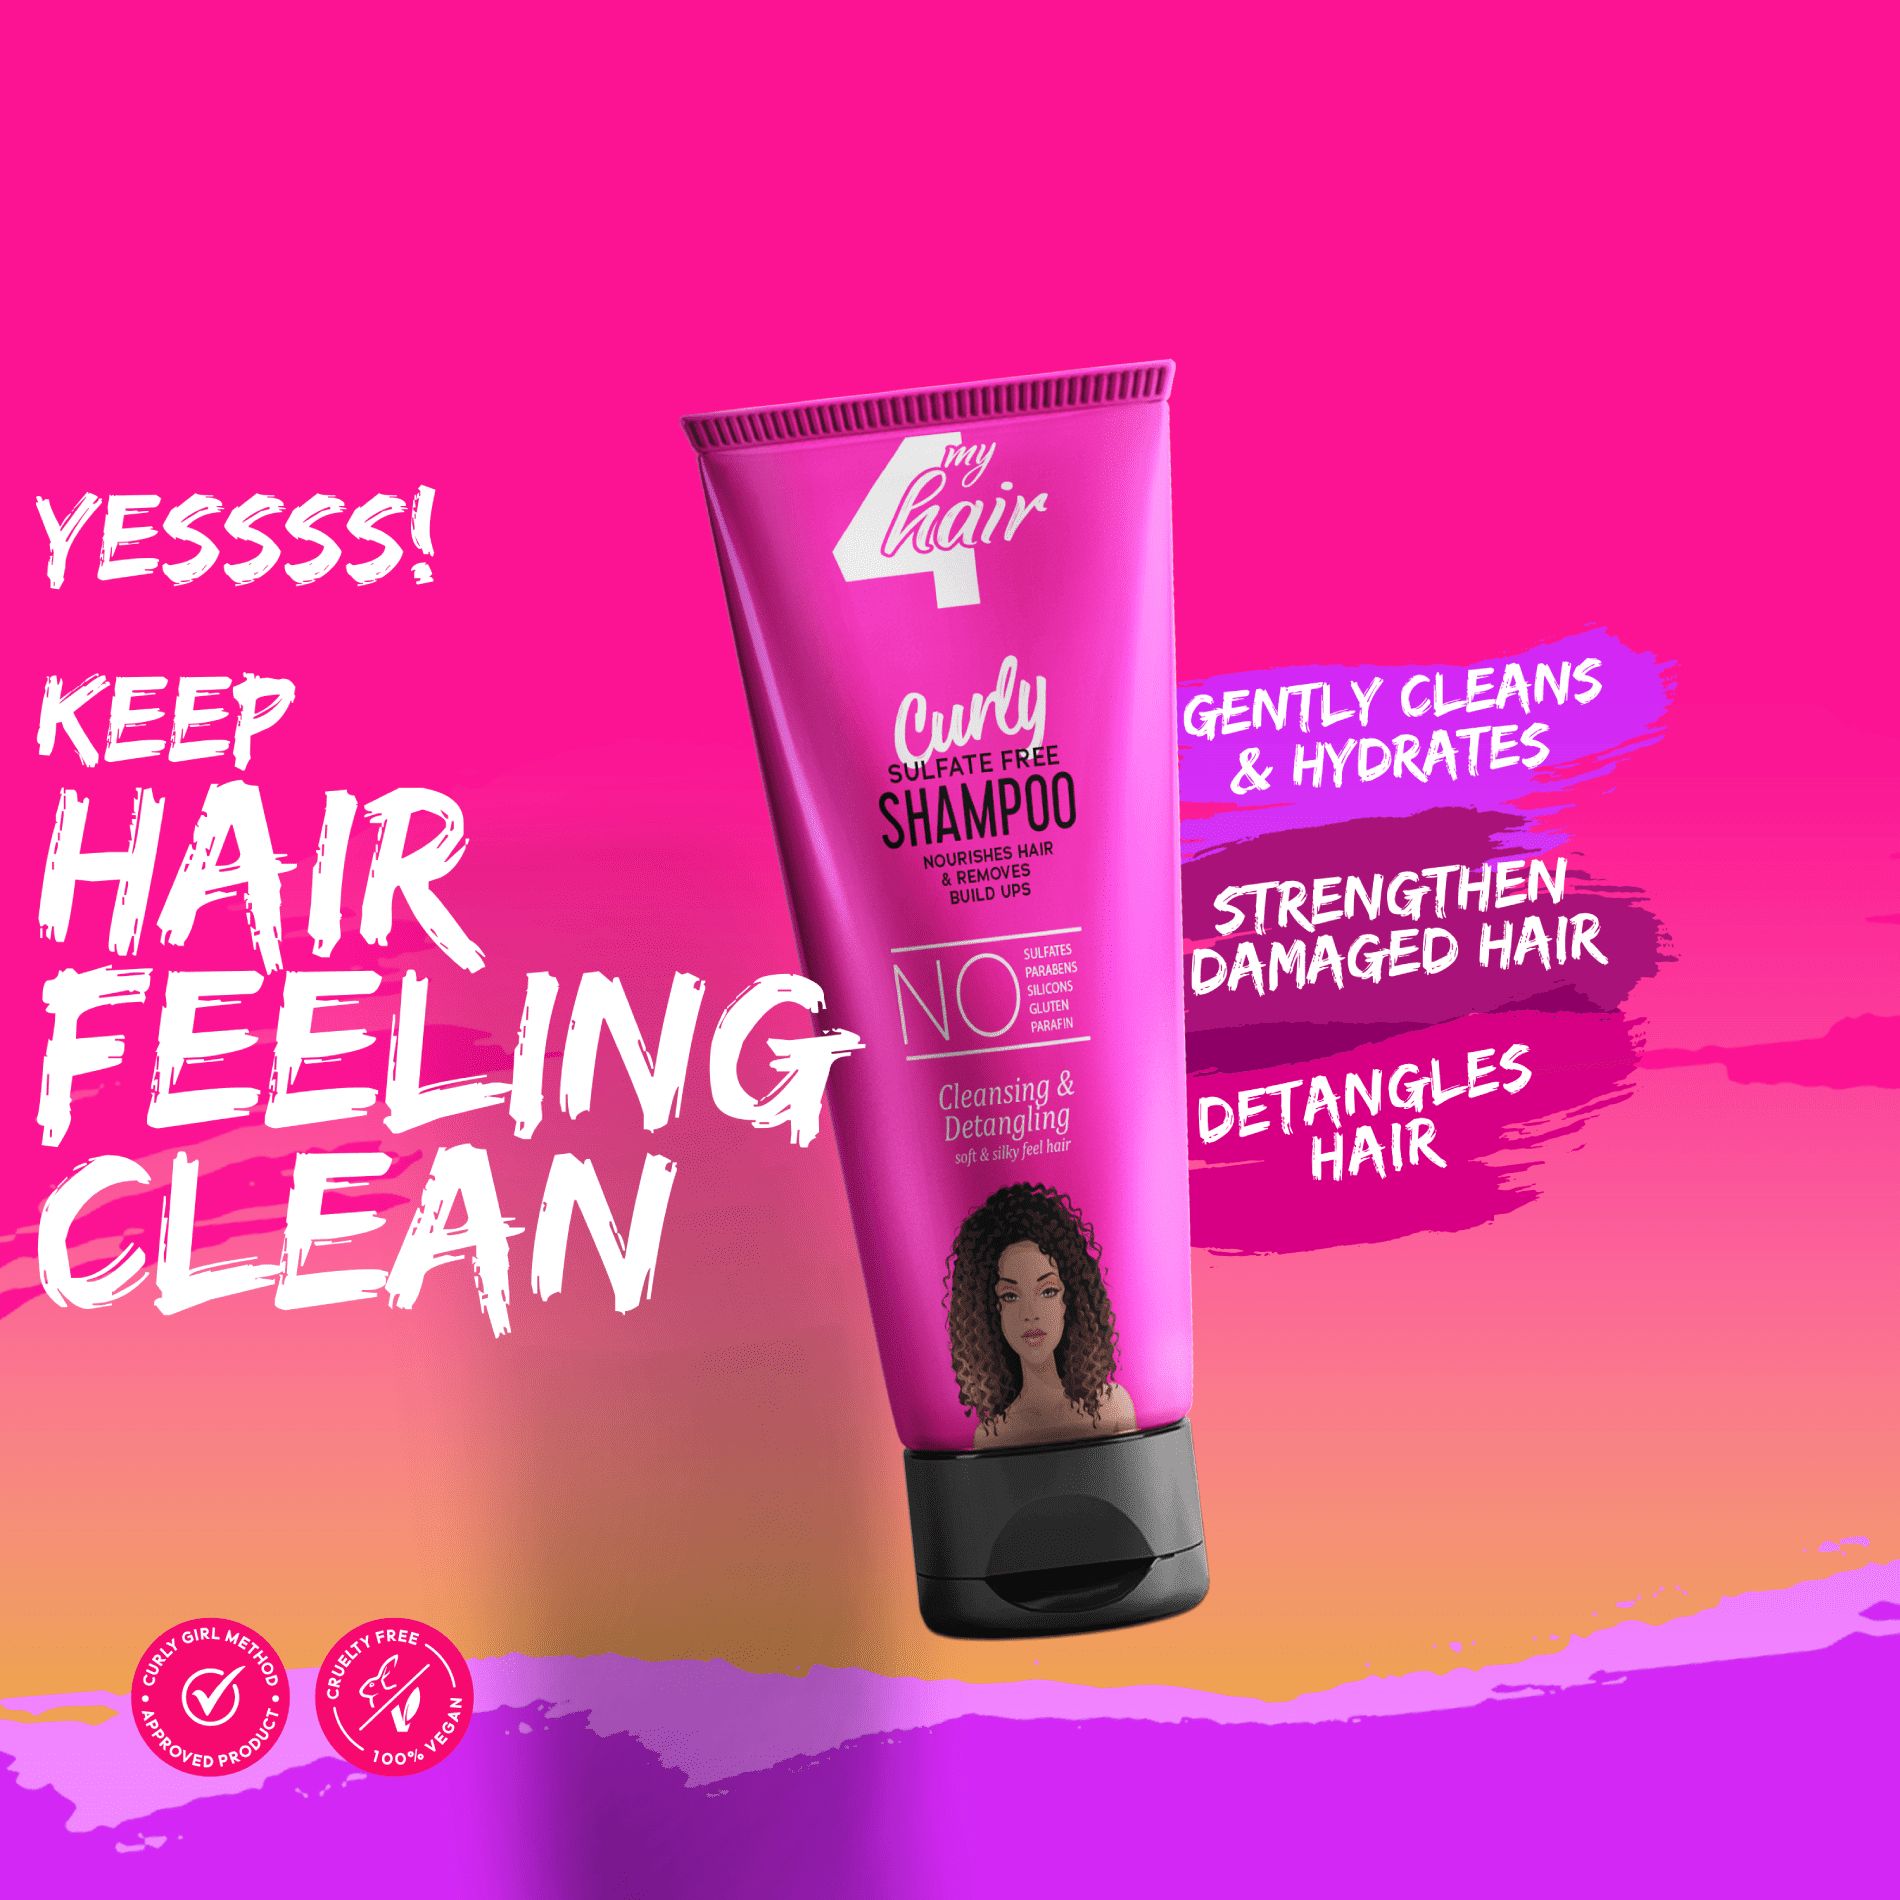 curly sulfate-free shampoo by 4myhair brand